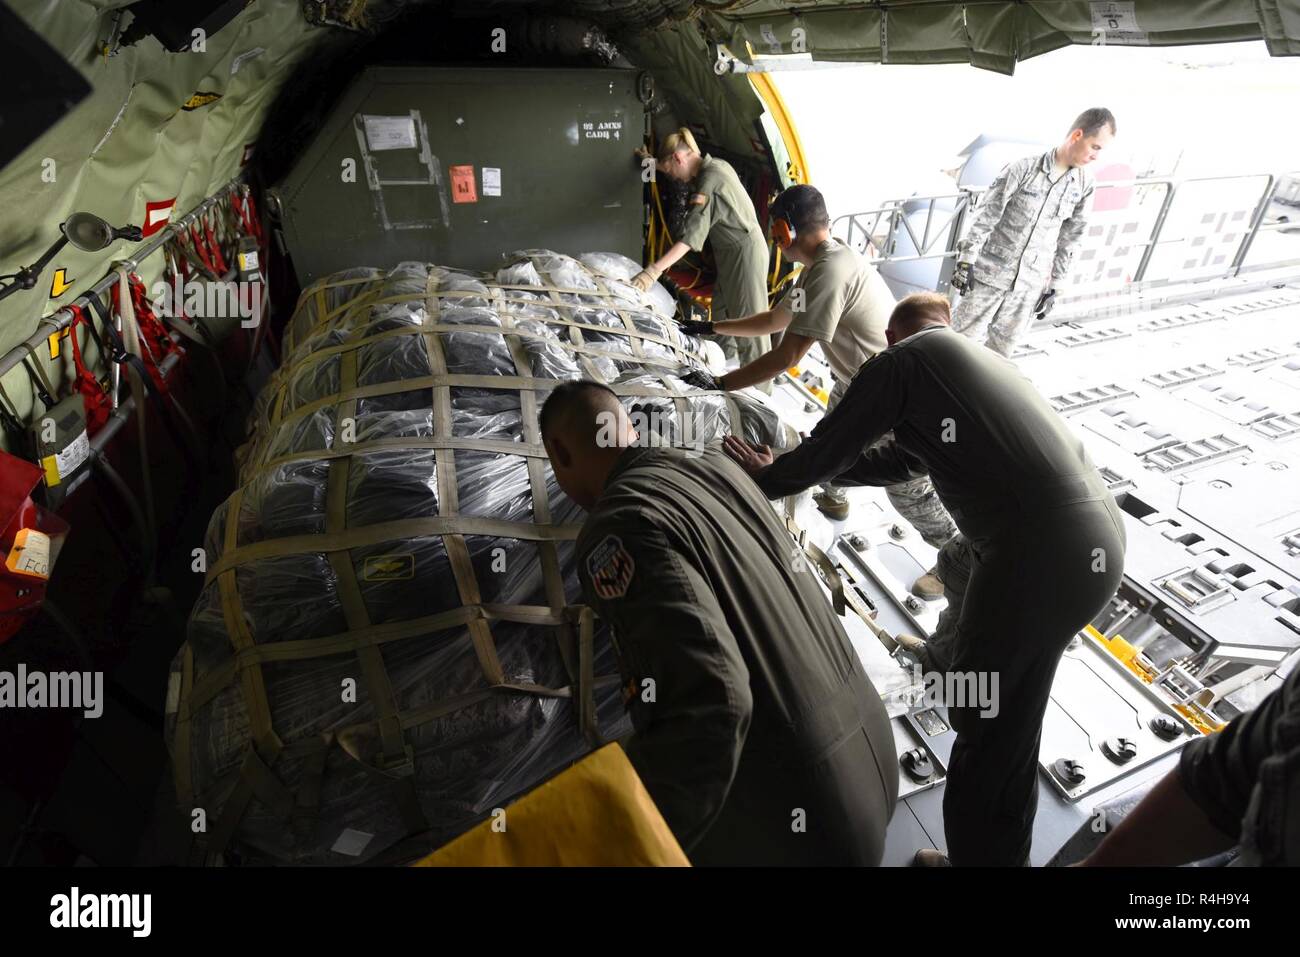 Airmen from the 92nd Air Refueling Squadron and Logistics Readiness Squadron push cargo into a KC-135 Stratotanker at Fairchild Air Force Base, Washington, September 2018. Mobility Airmen fuel the fight, provide airlift needed for supplies and personnel, and enable versatile and timely effects through contingency response ensuring mission success. Stock Photo